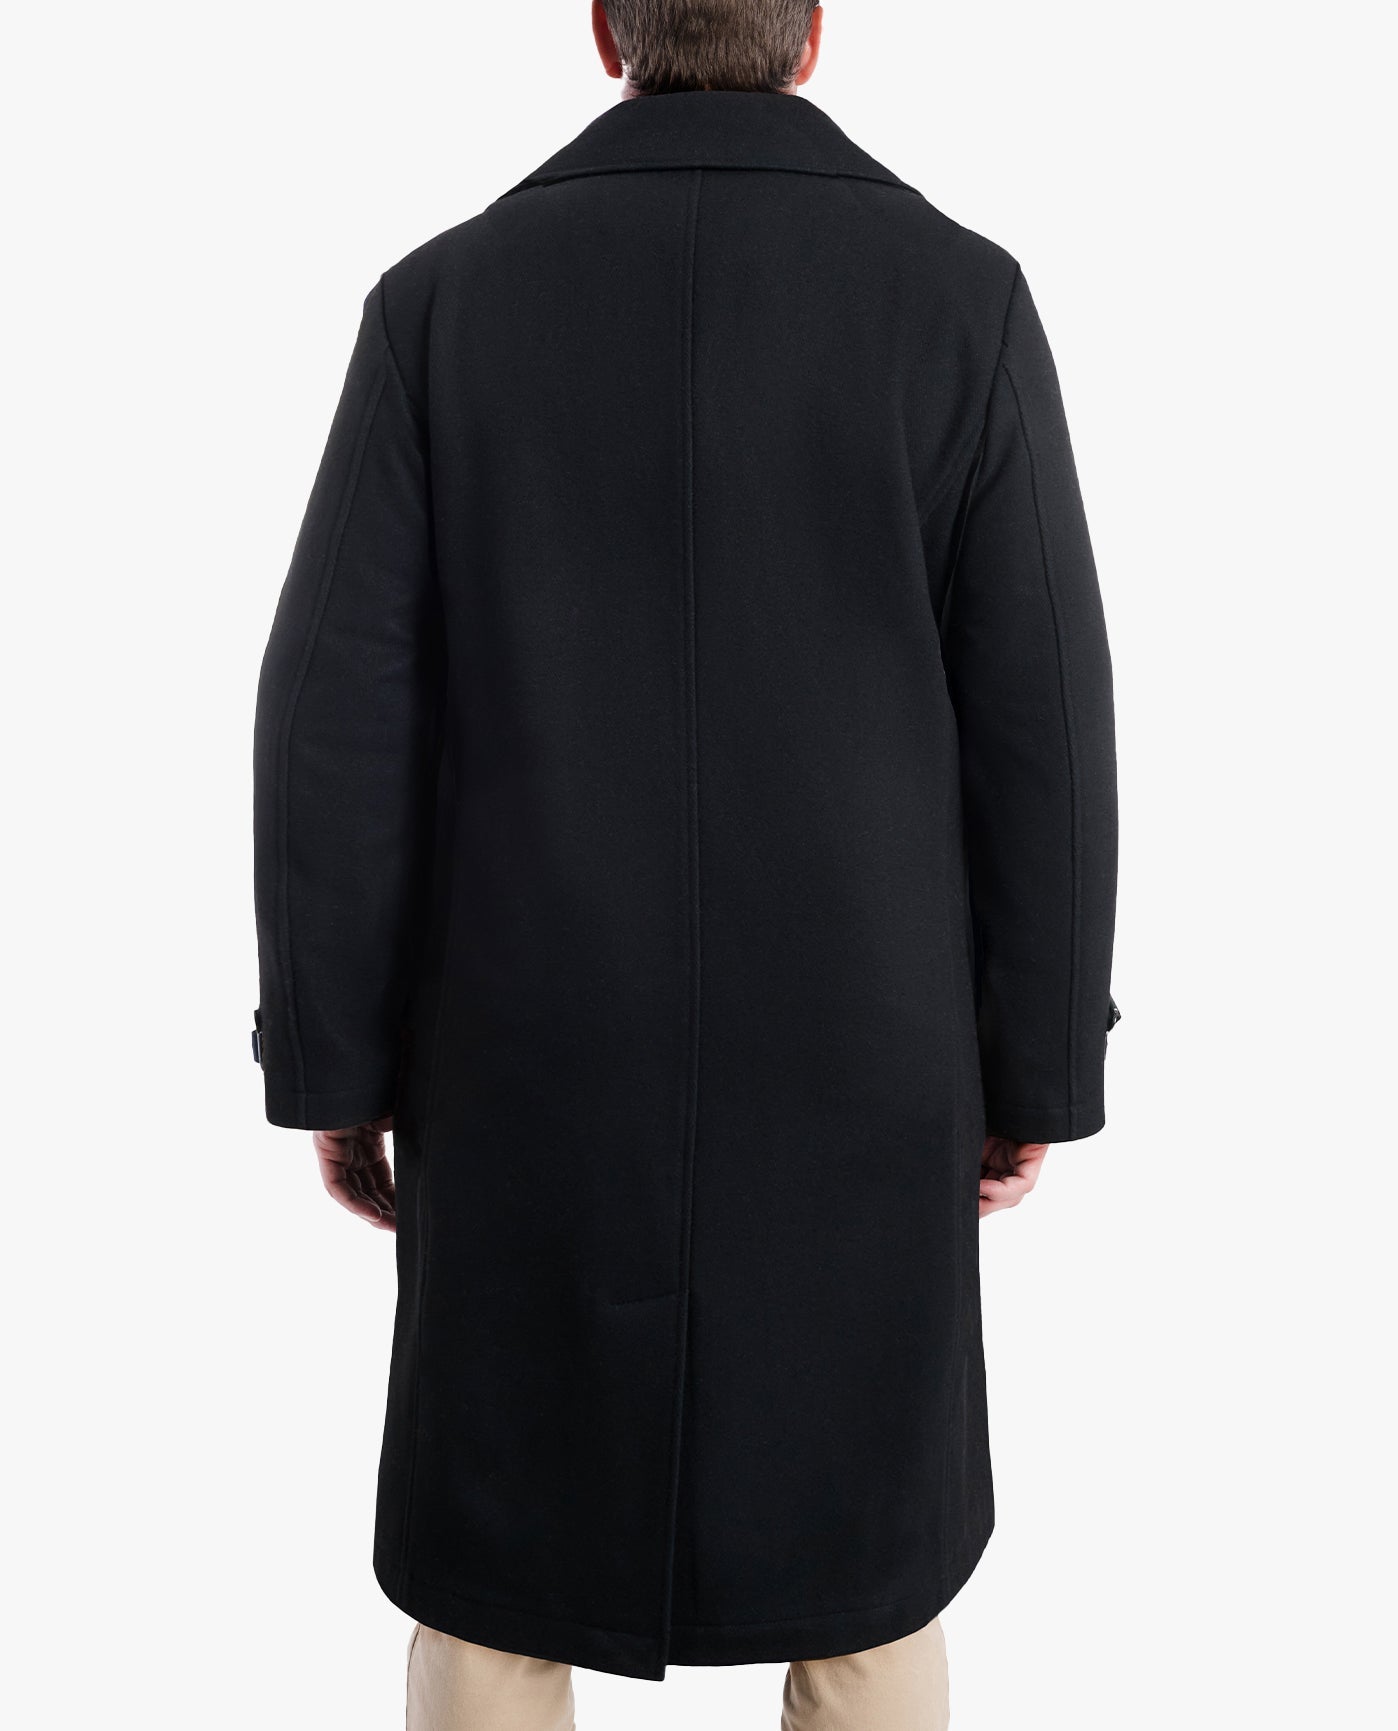 BACK VIEW OF LILLE 46" OFFICERS COAT | BLACK